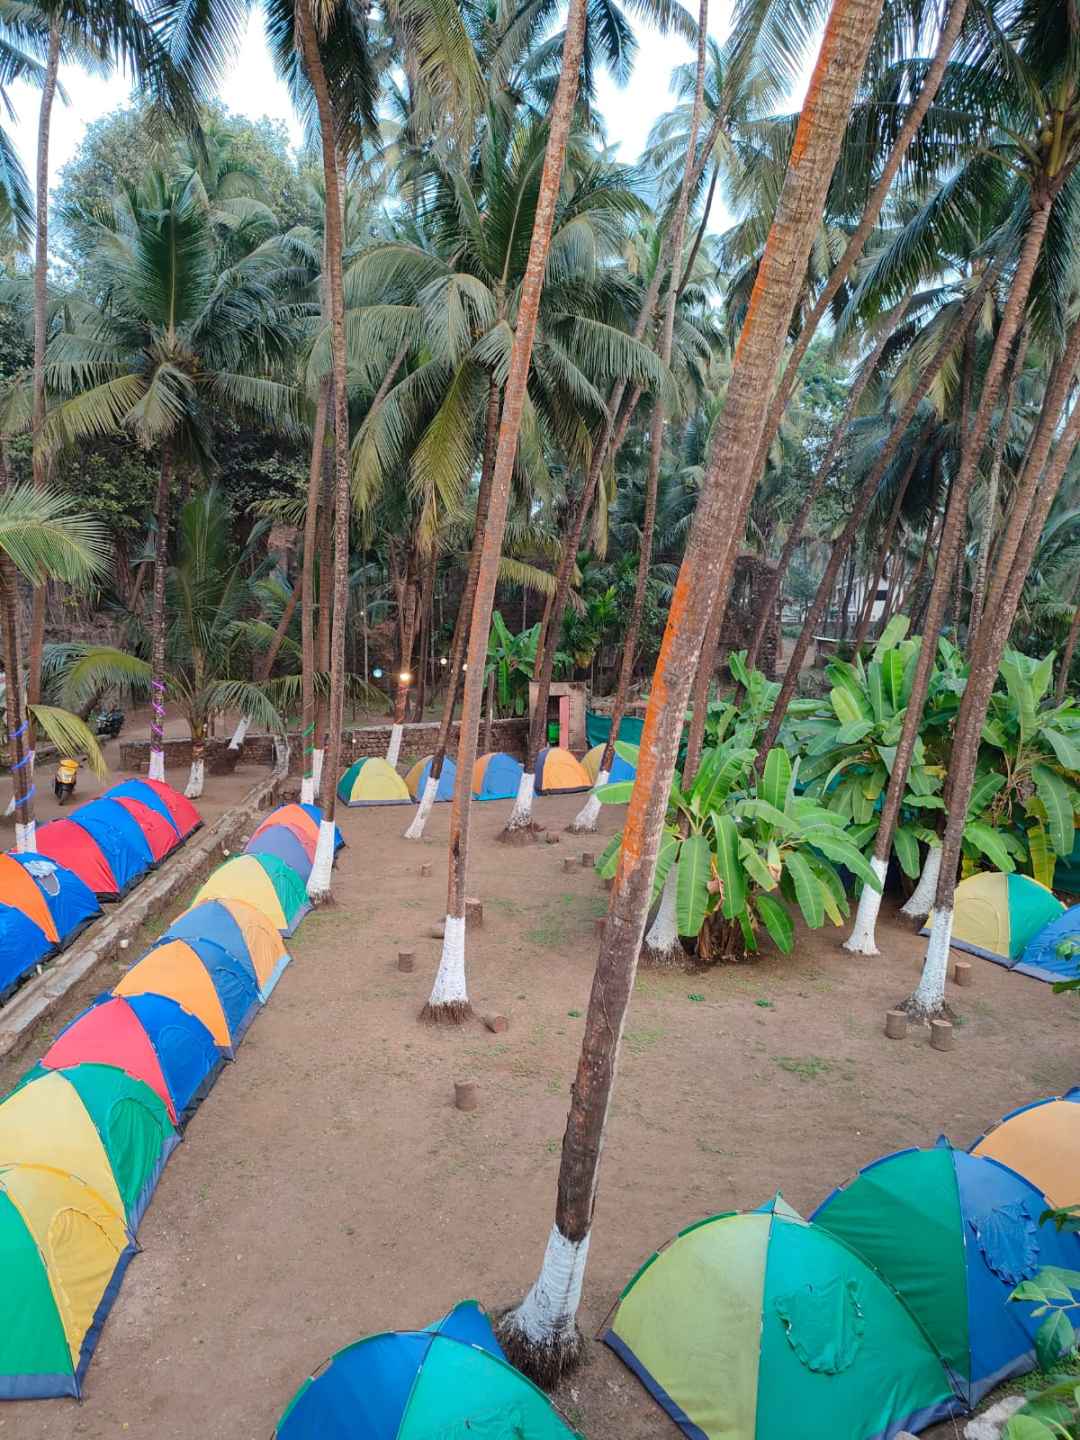 Tent by the bay Alibaug beach camping 